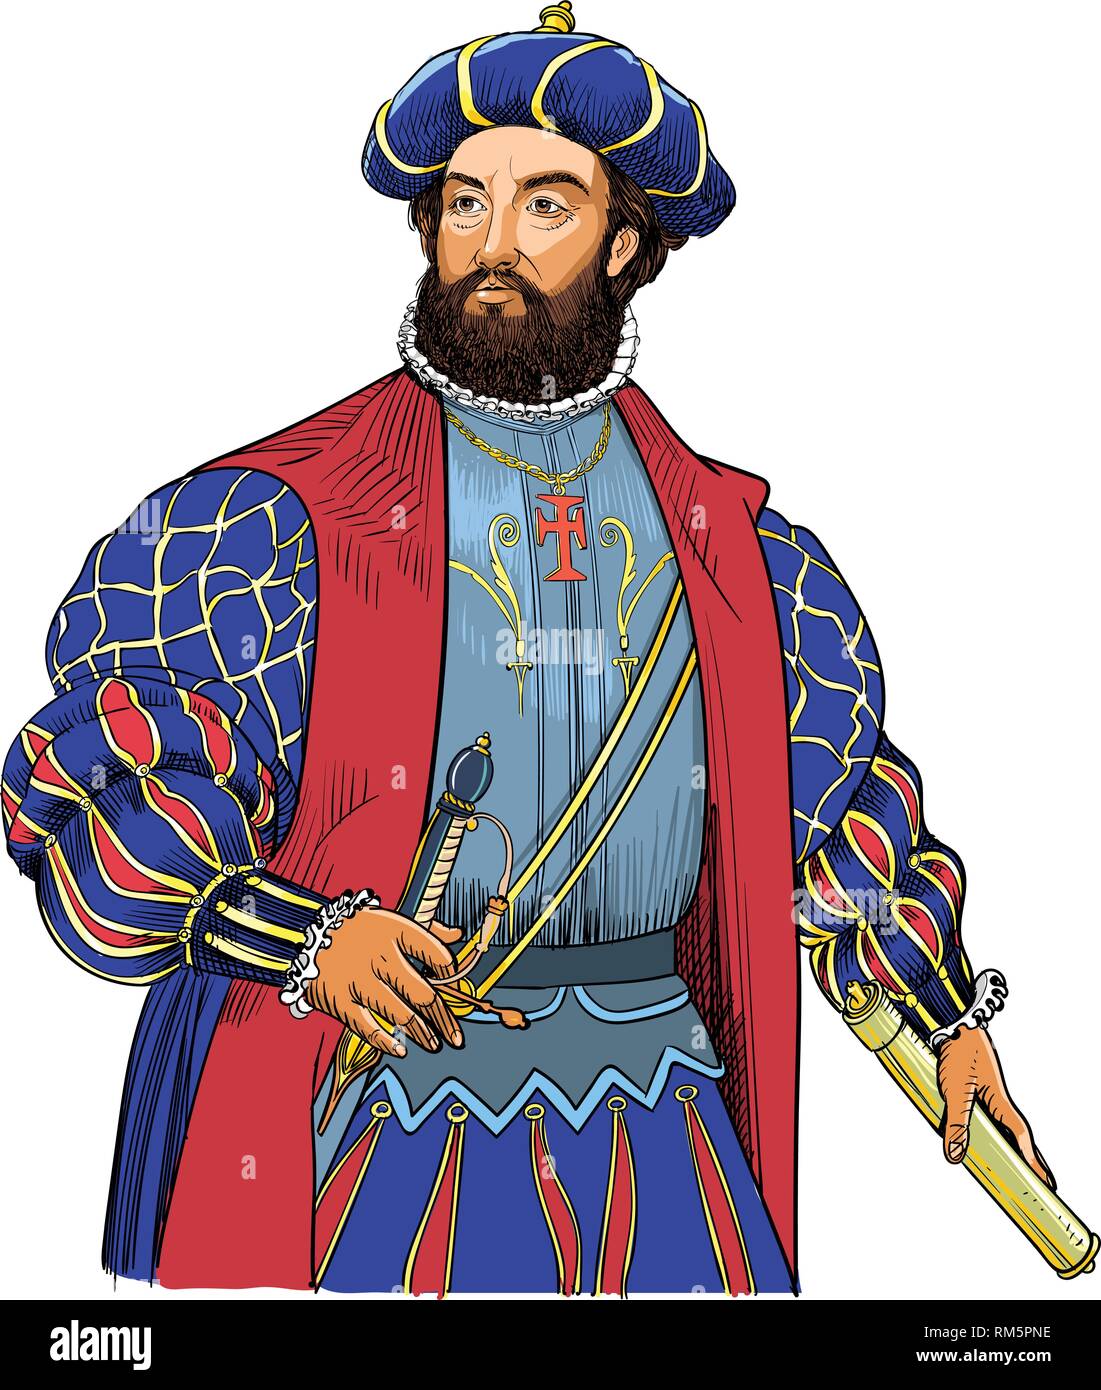 Vasco da Gama portrait in line art. He was Portuguese explorer and the first European who reached India by sea rounded the Cape of Good Hope in 1498. Stock Vector